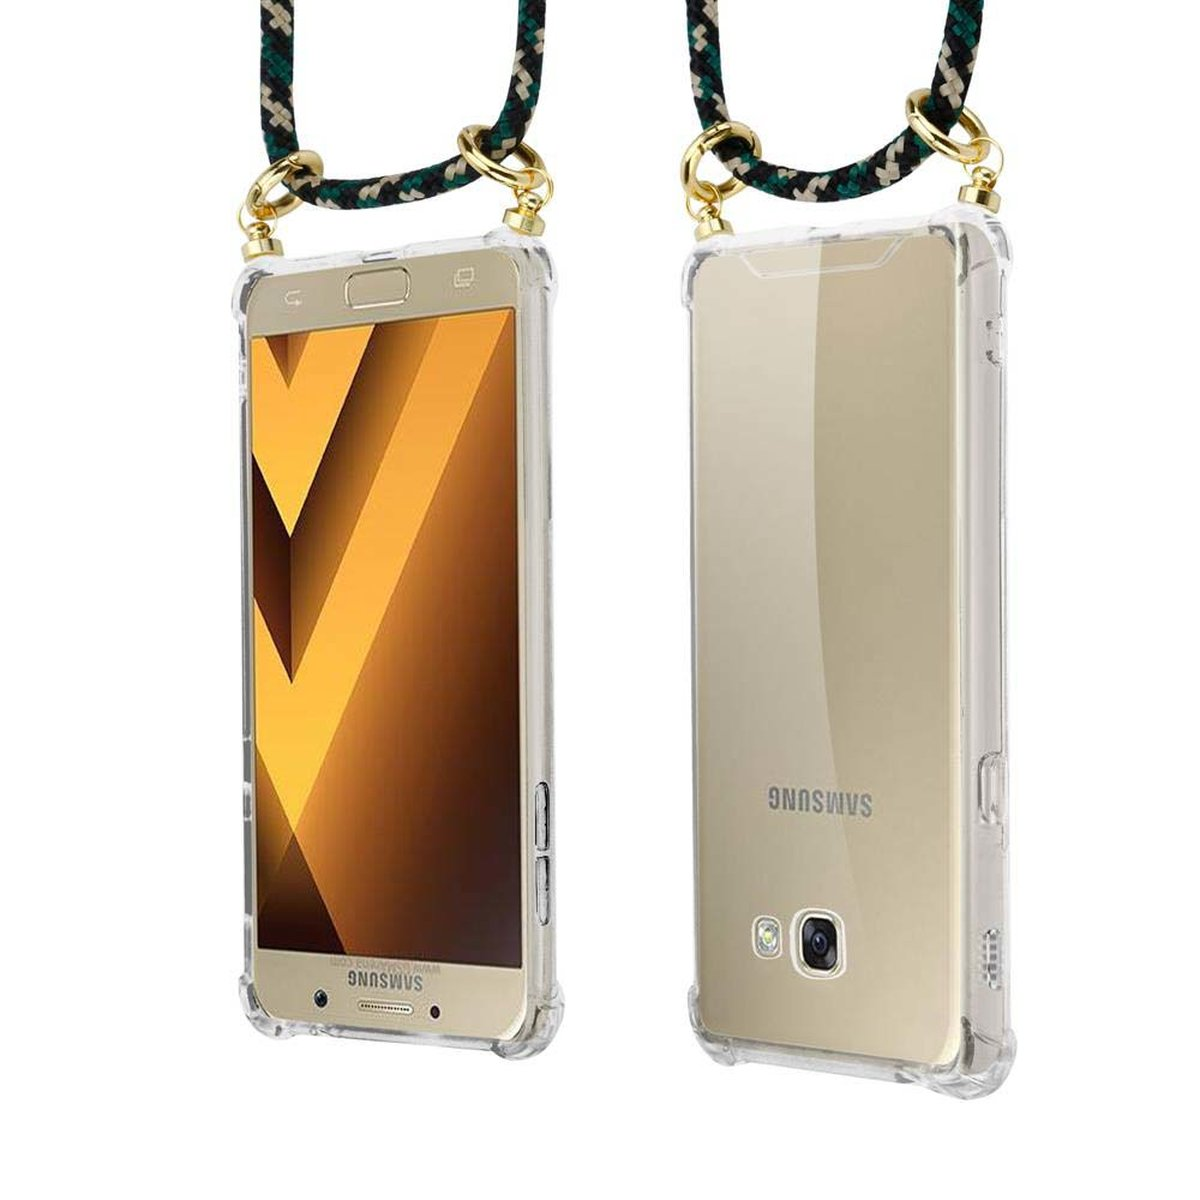 Backcover, Kordel Gold 2017, und CADORABO CAMOUFLAGE Galaxy Kette abnehmbarer Handy Hülle, mit A5 Ringen, Band Samsung,